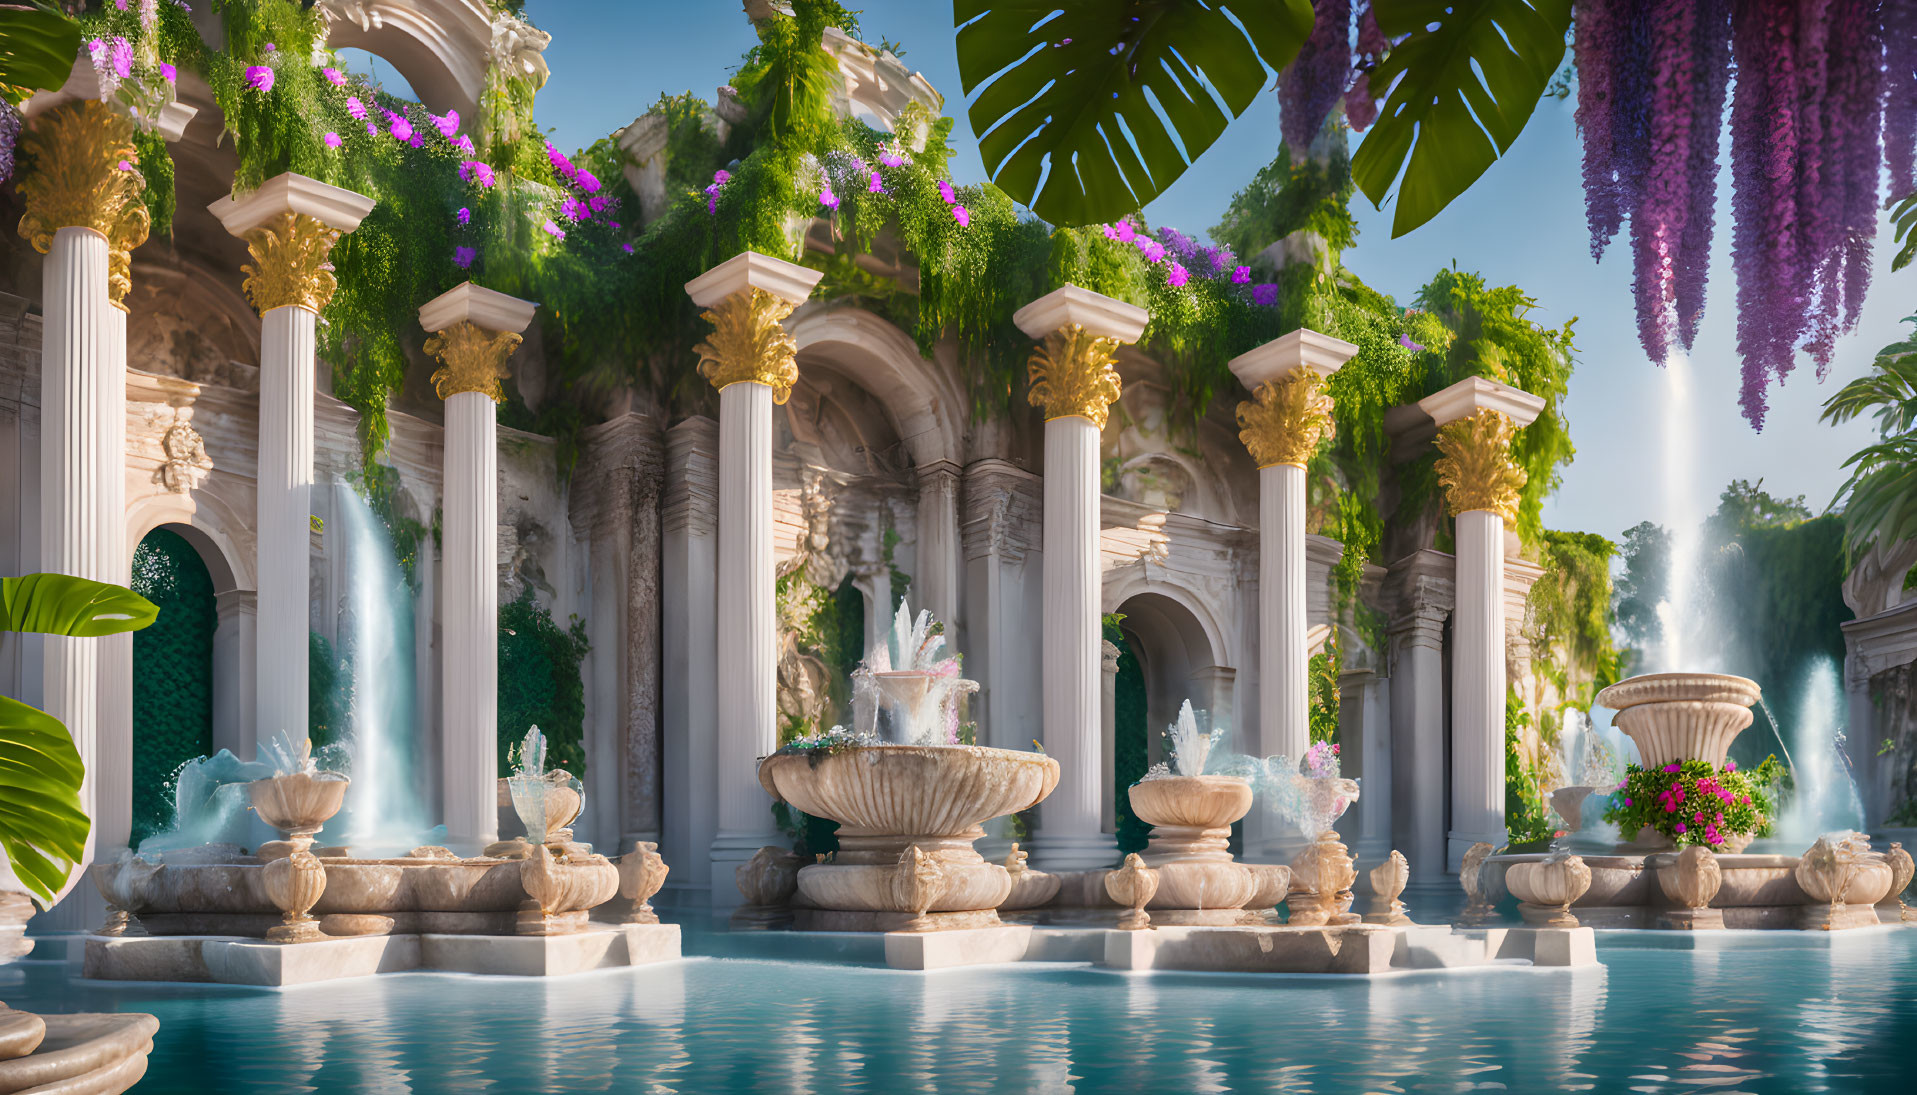 Tranquil pool with classical columns, golden accents, lush greenery, and purple flowers